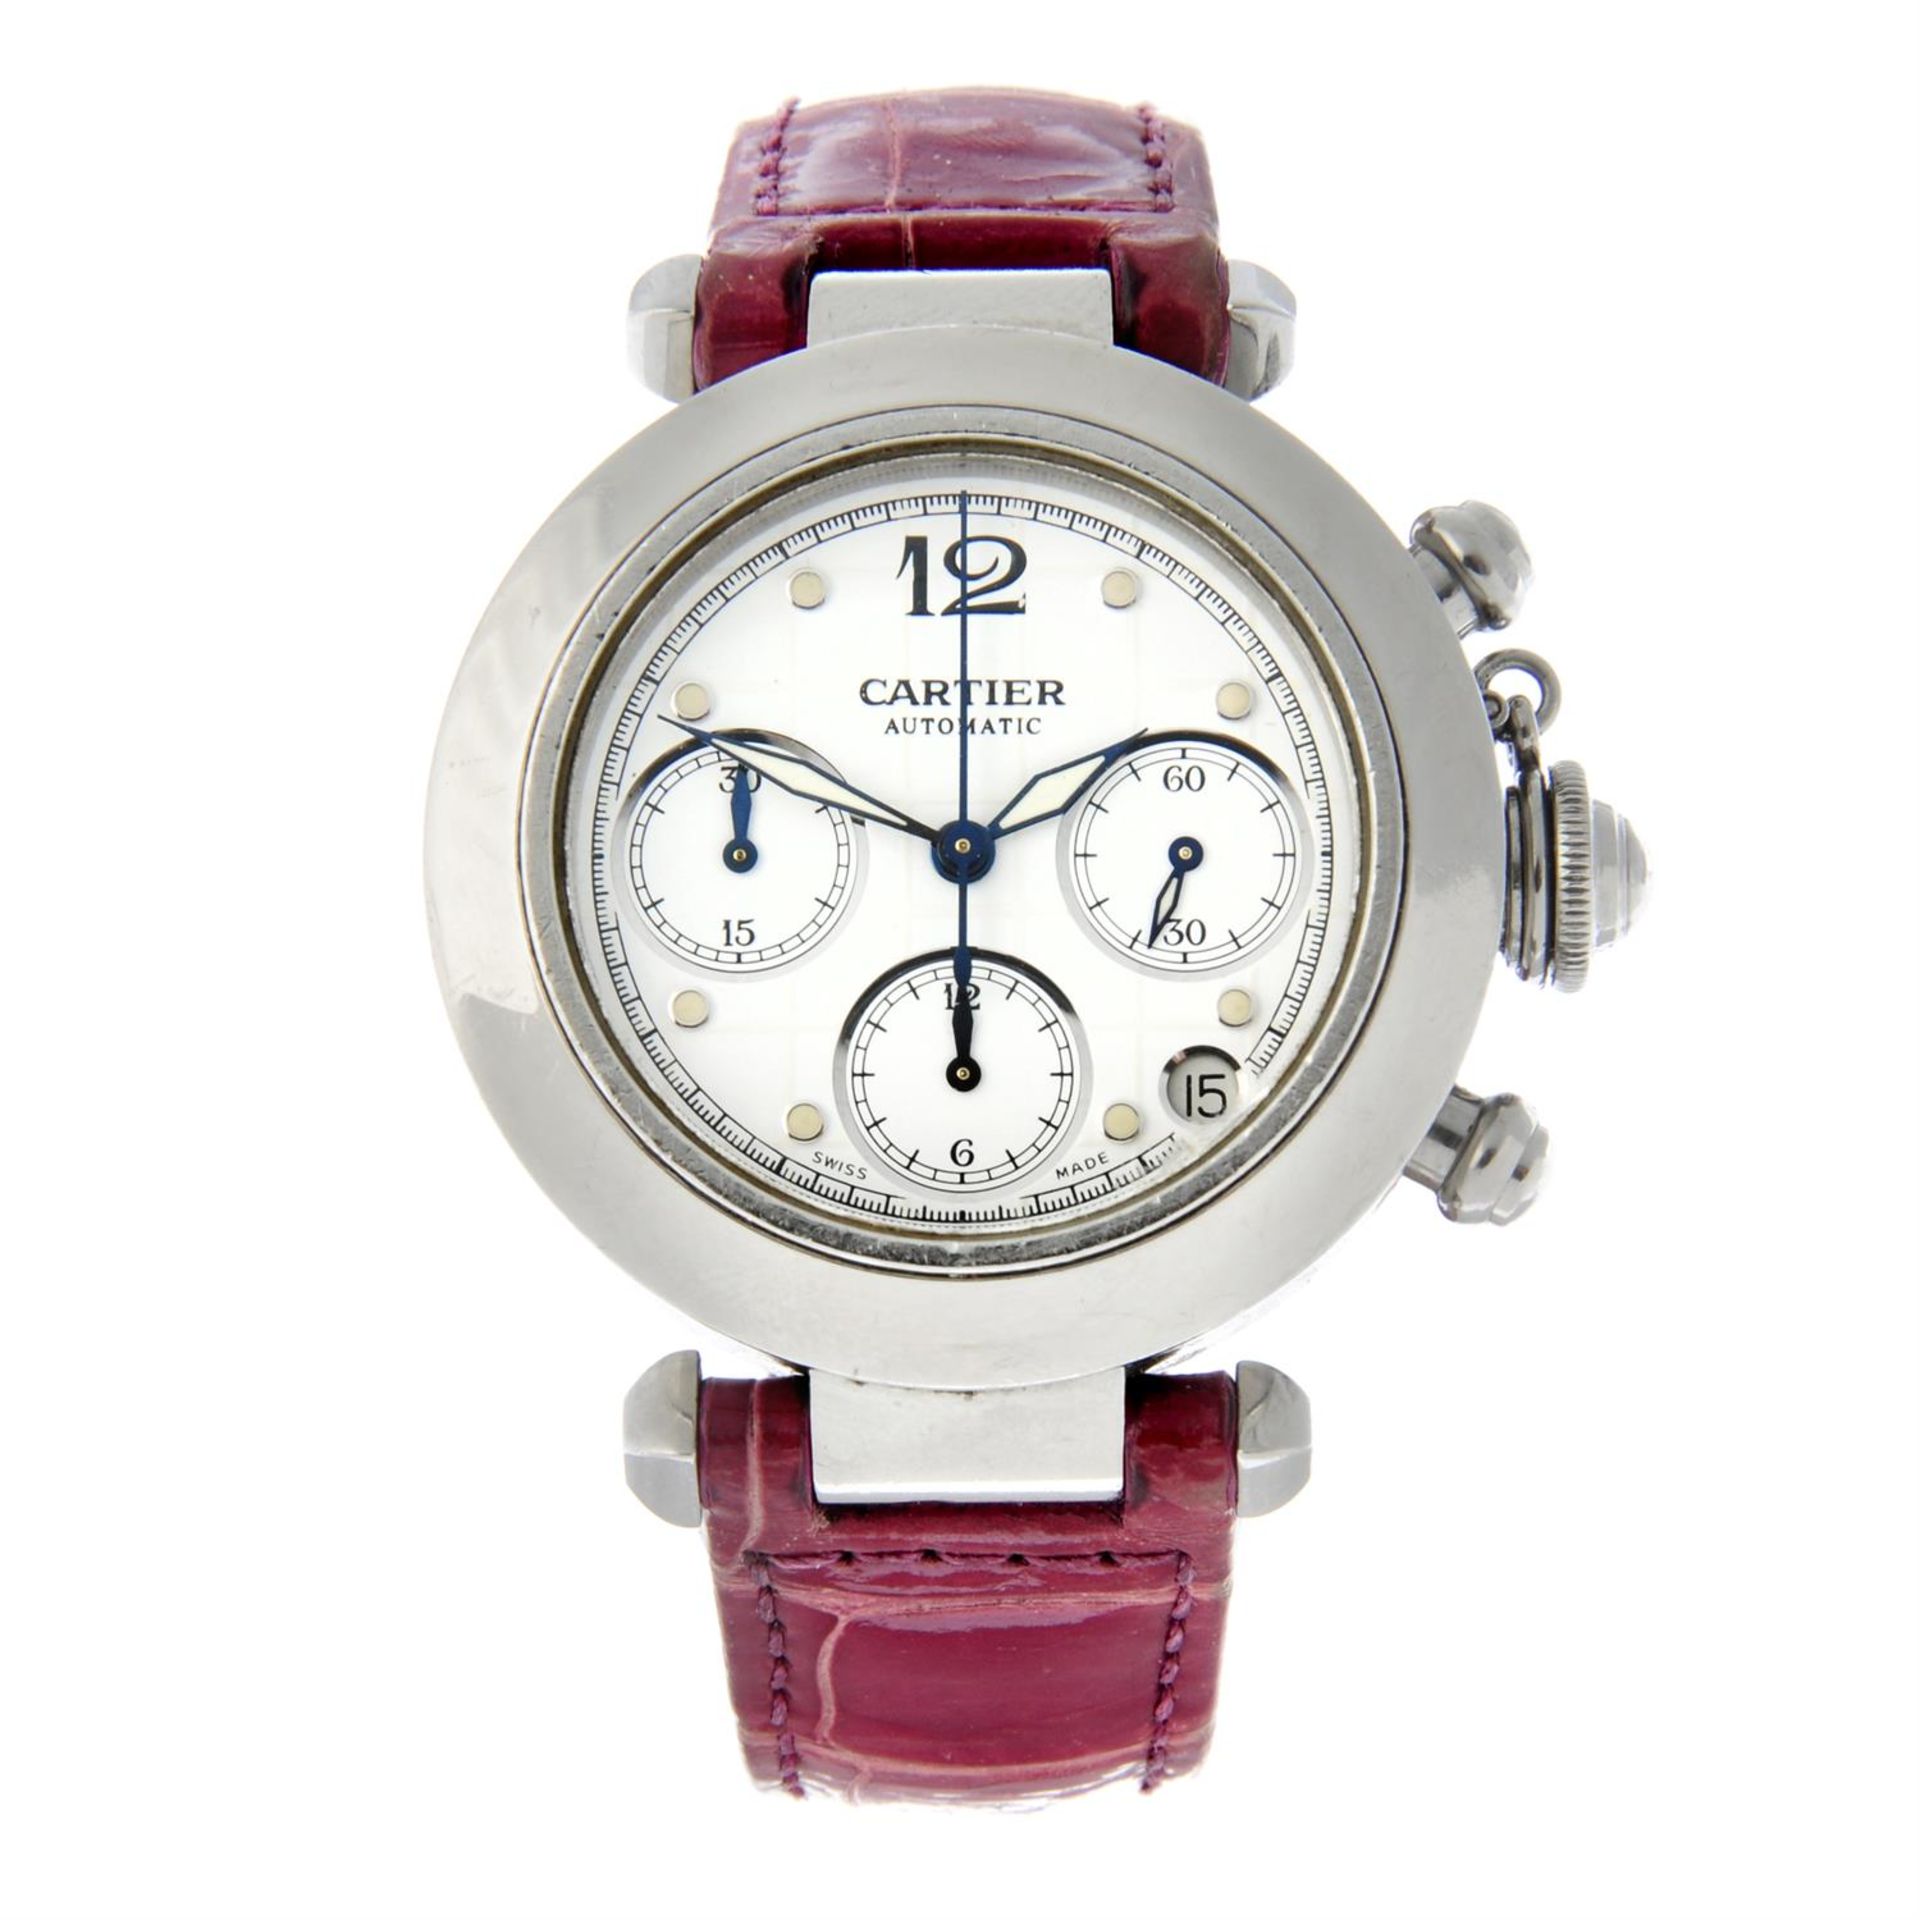 CARTIER - a stainless steel Pasha chronograph wrist watch, 36mm.